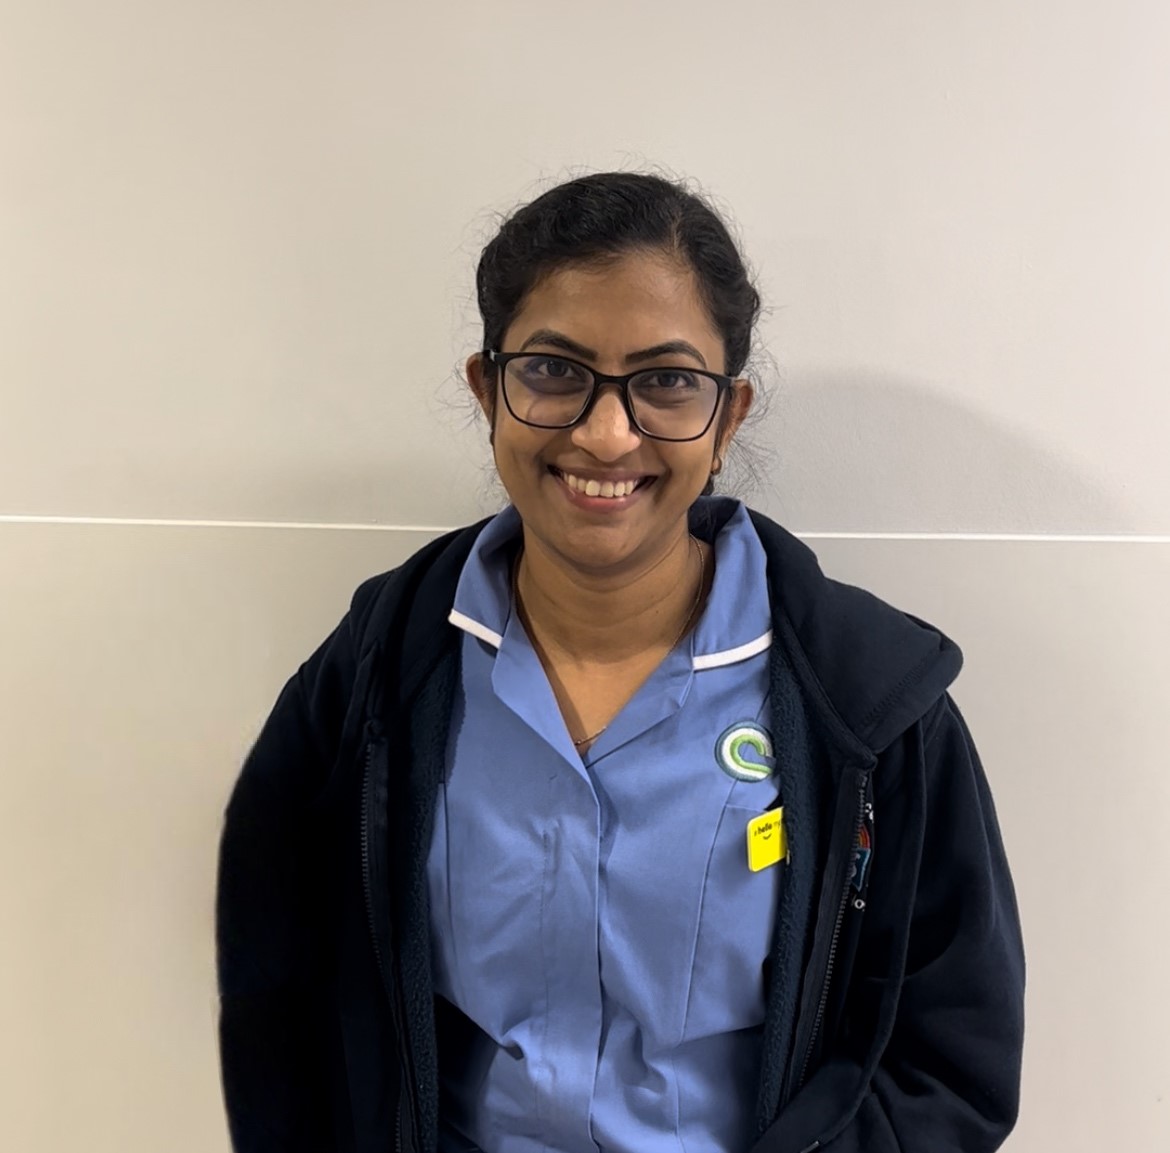 Ahead of #InternationalNursesDay, we spoke with one of our fab staff nurses, Jyothi Vidya about her career journey from India to Liverpool and why nursing is her passion. Jyothi shares her story here 👉 orlo.uk/Lmwkw Start your own CCC story 👉 orlo.uk/JP5Np